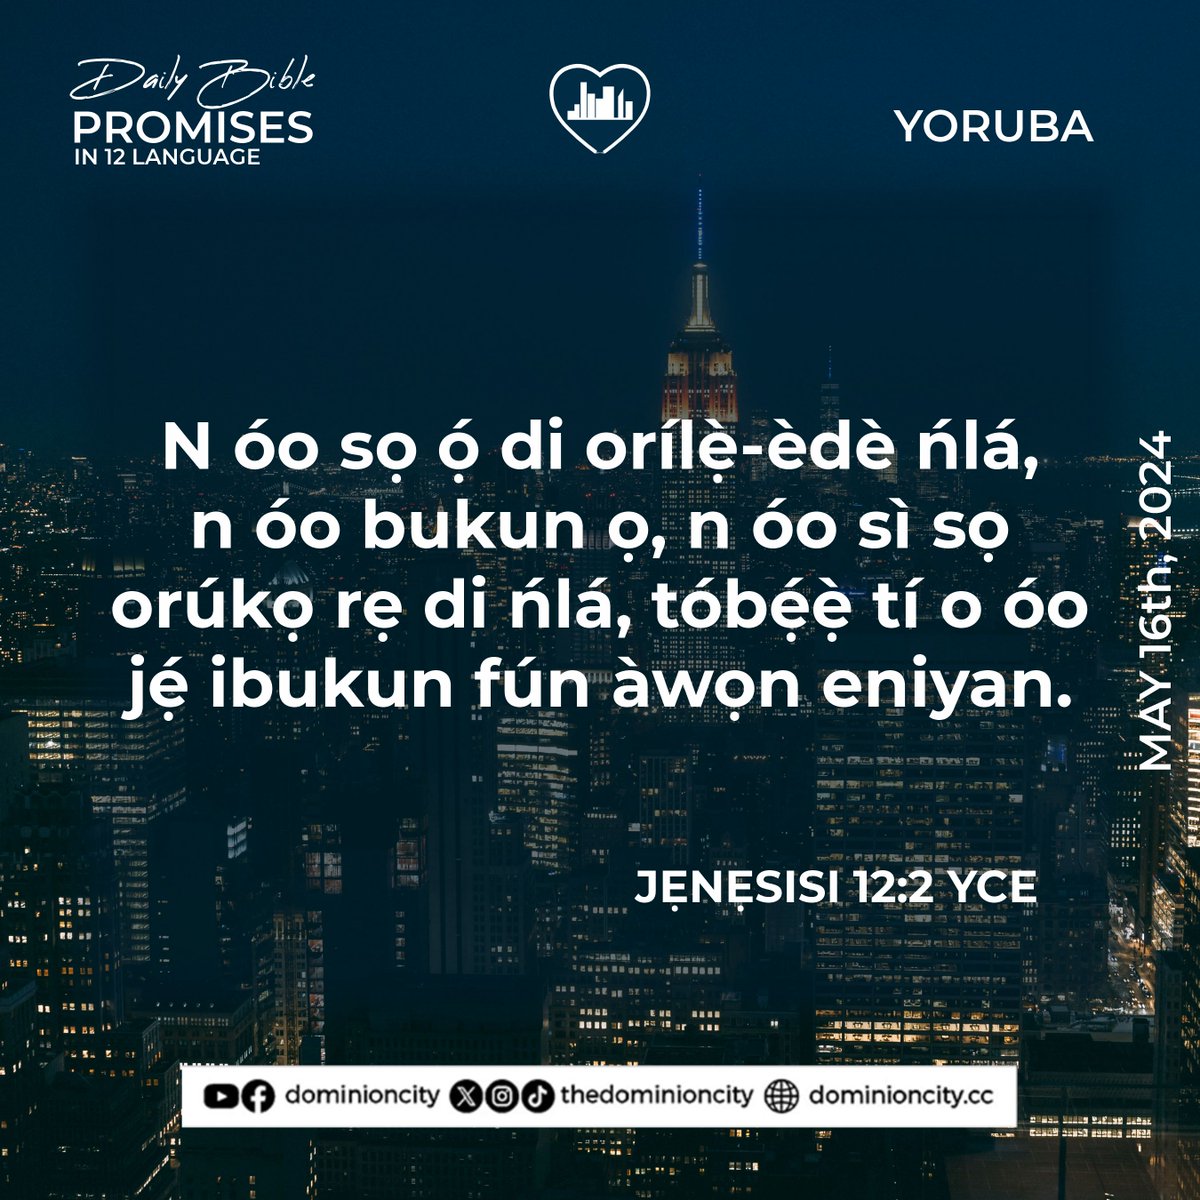 If you believe, type “AMEN”!

SET 3 of 3 | DAILY BIBLE PROMISES IN 12 LANGUAGES | MAY 16TH 2024 | LIKE, FOLLOW & SHARE

#Bible #GodsWord #trendingnow #Biblepromises #trendingreels #hope #love #faith #GoodNews #NewsUpdate